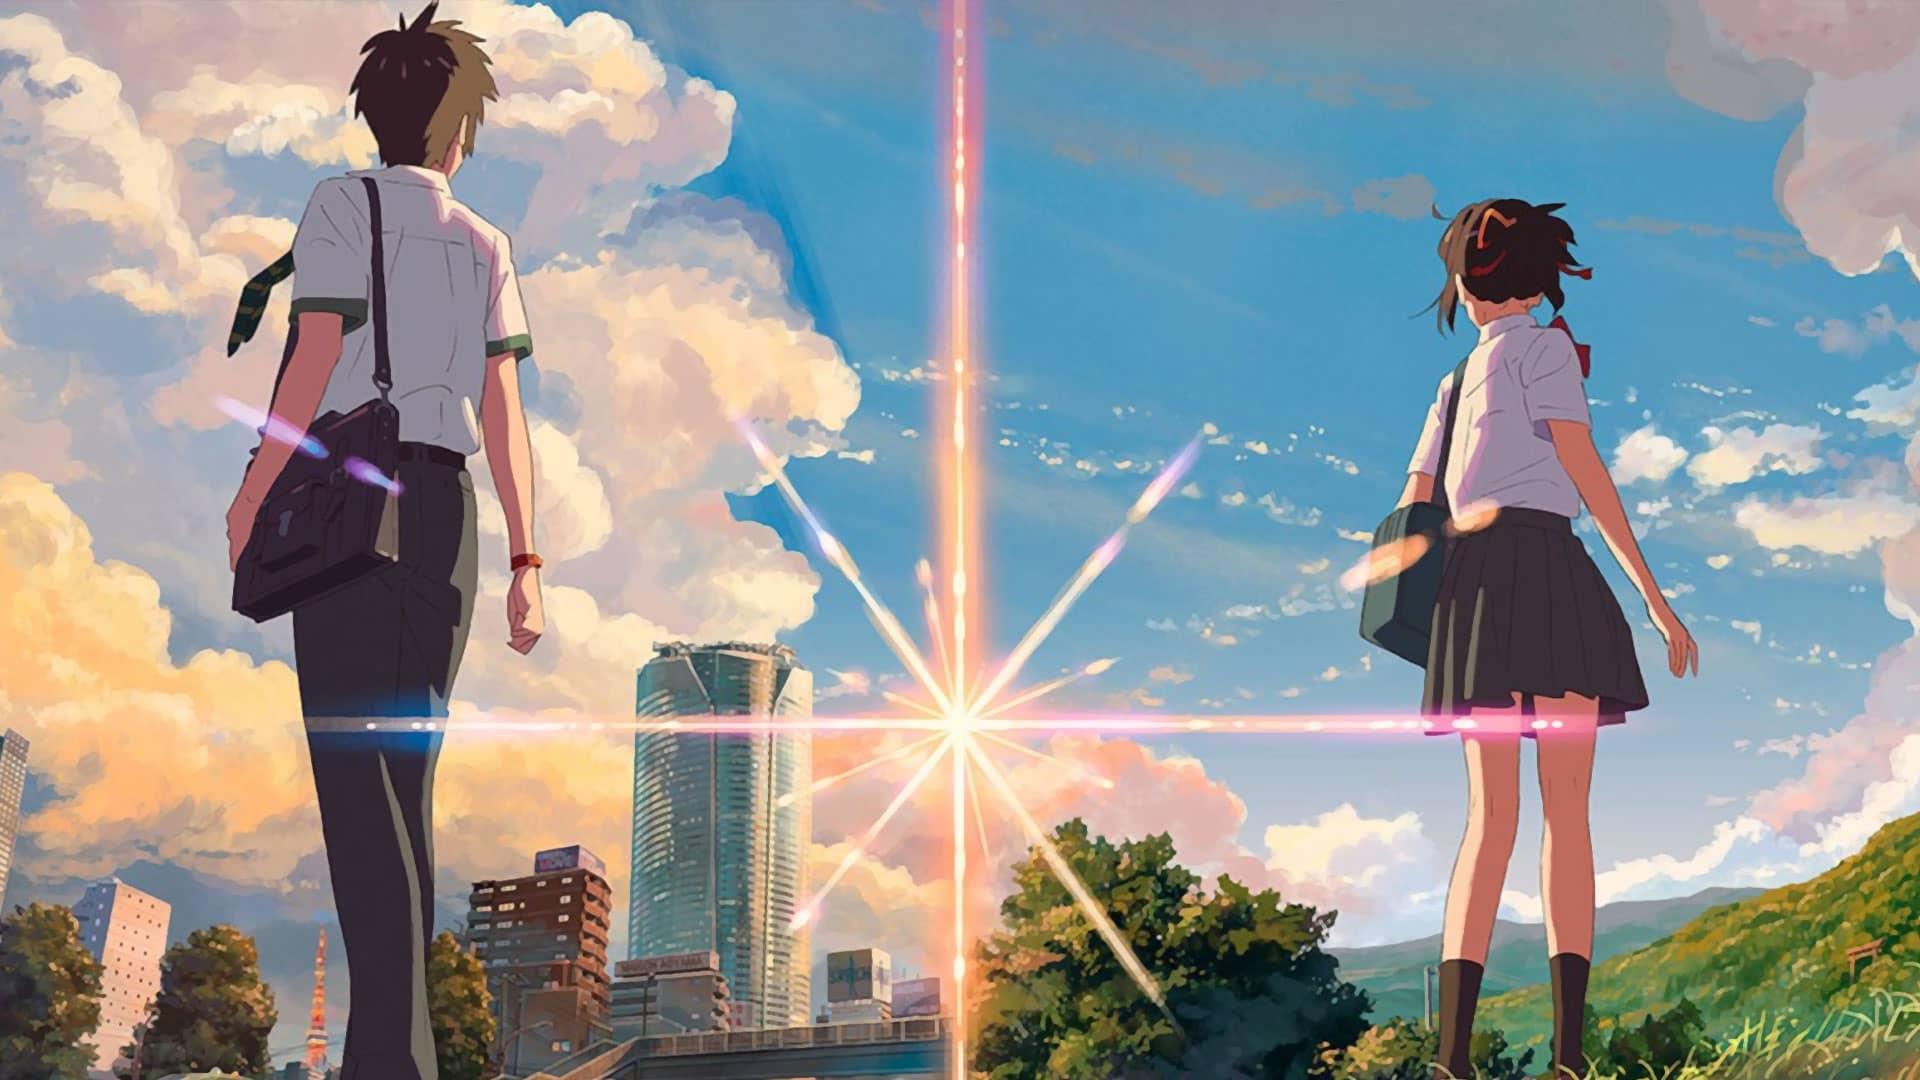 Your Name background image